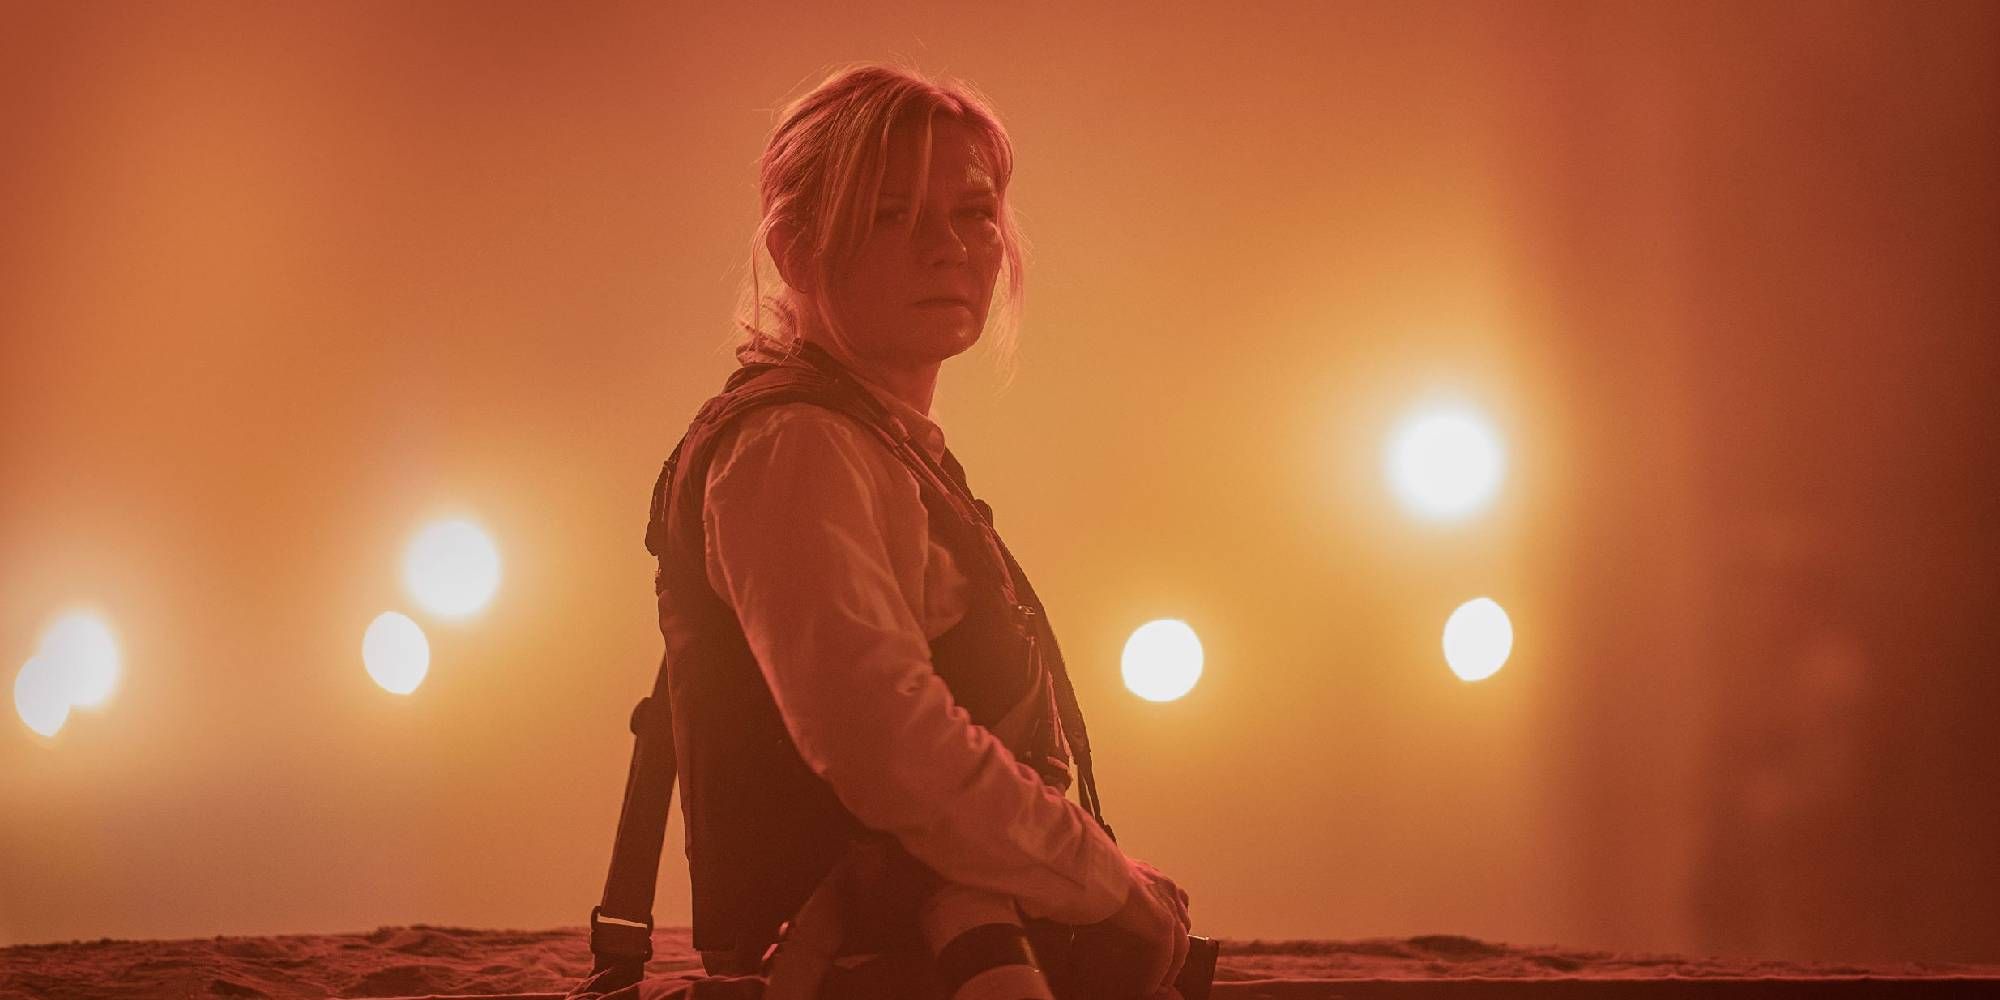 A foggy shot of Kirsten Dunst in Civil War looking at the camera.